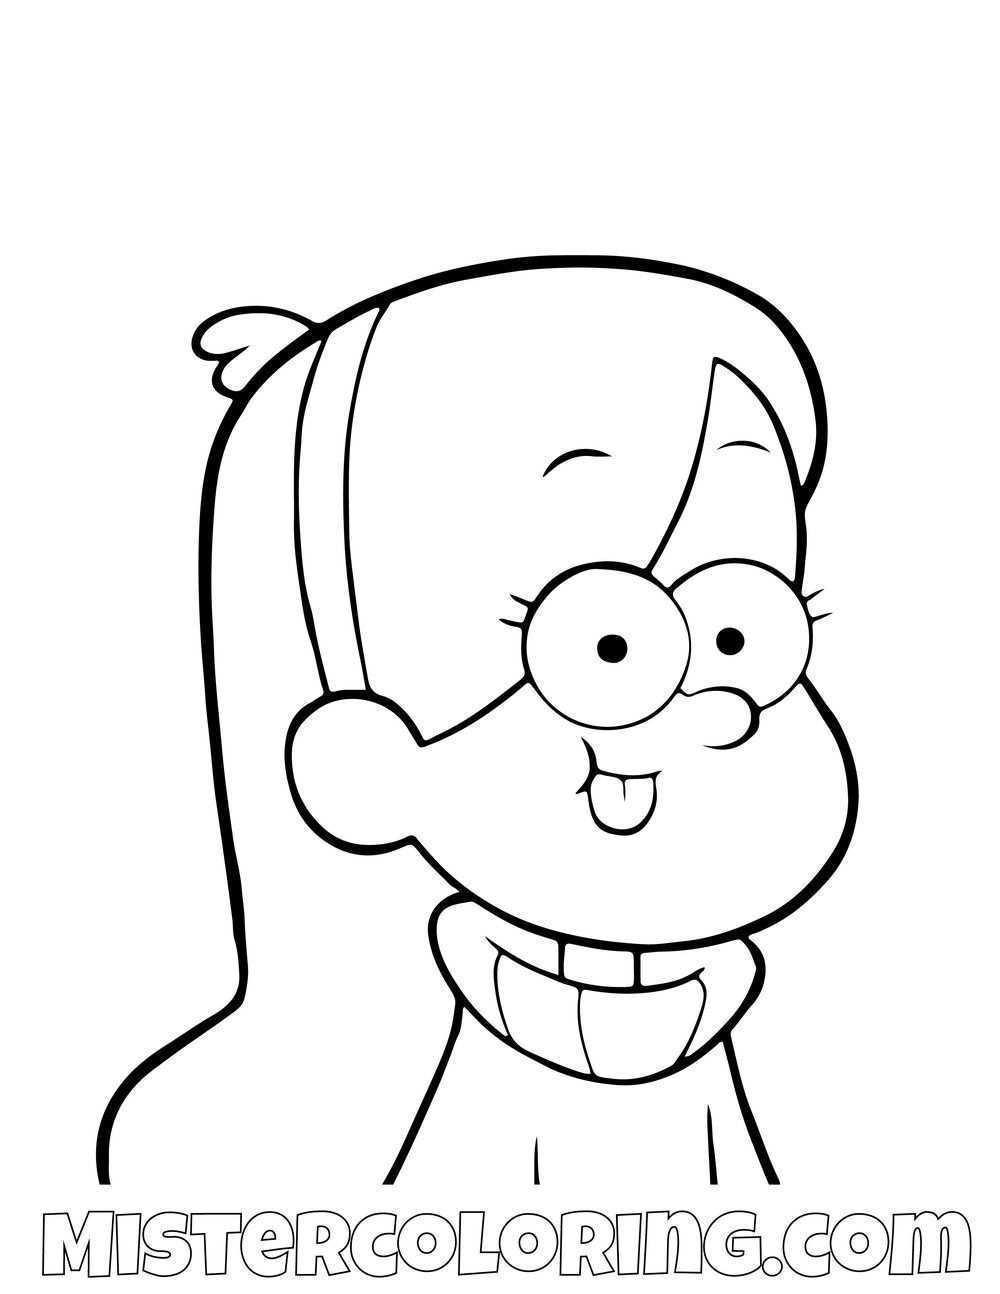 Mabel Pines Sticking Tongue Out Gravity Falls Coloring Pages For Kids Boyama Sayfalar